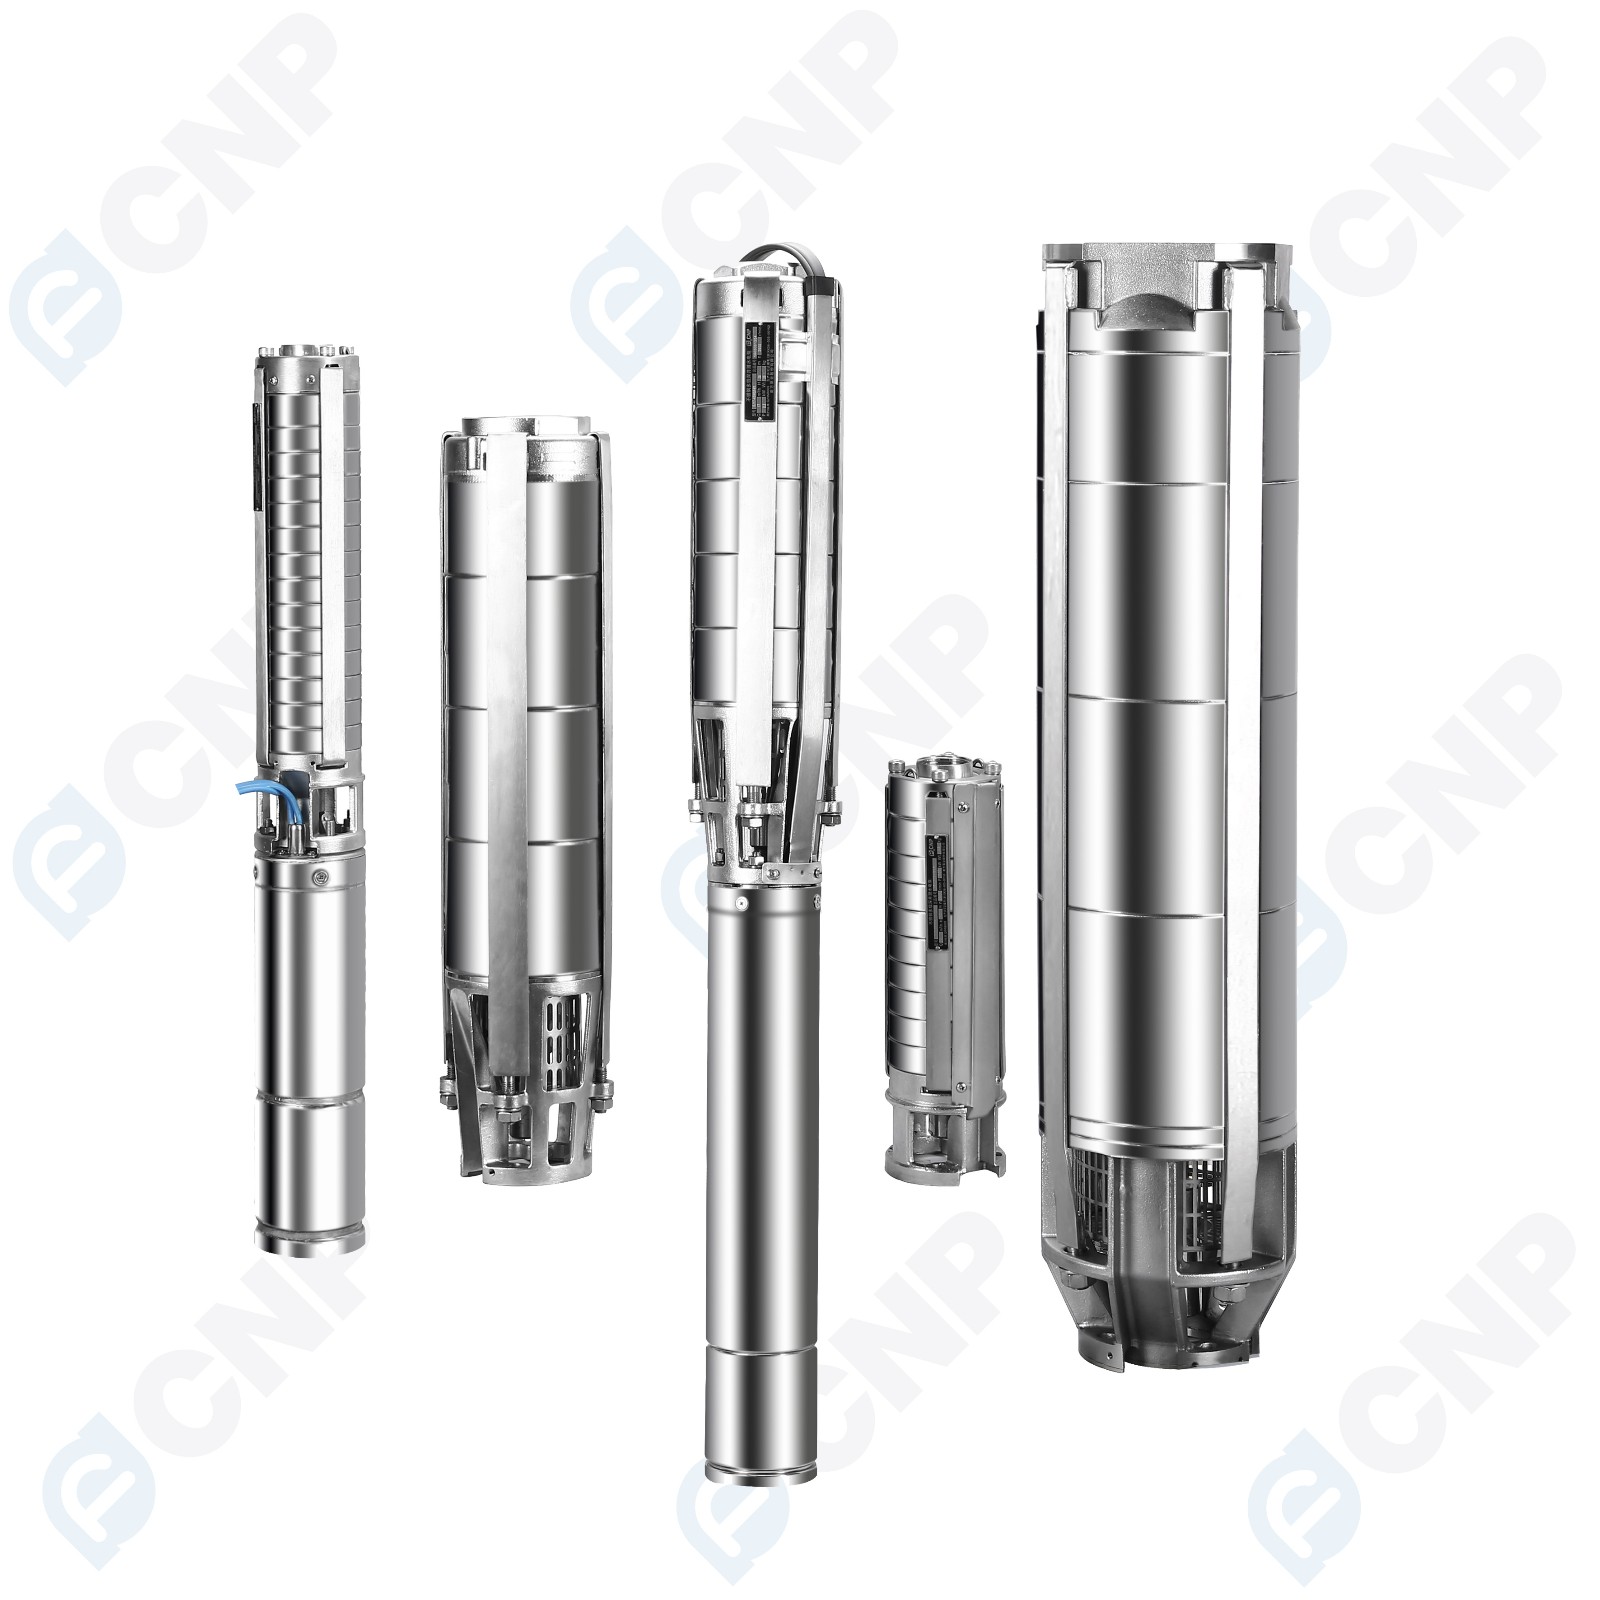 SJ Multistage Deep-well Submersible Pump